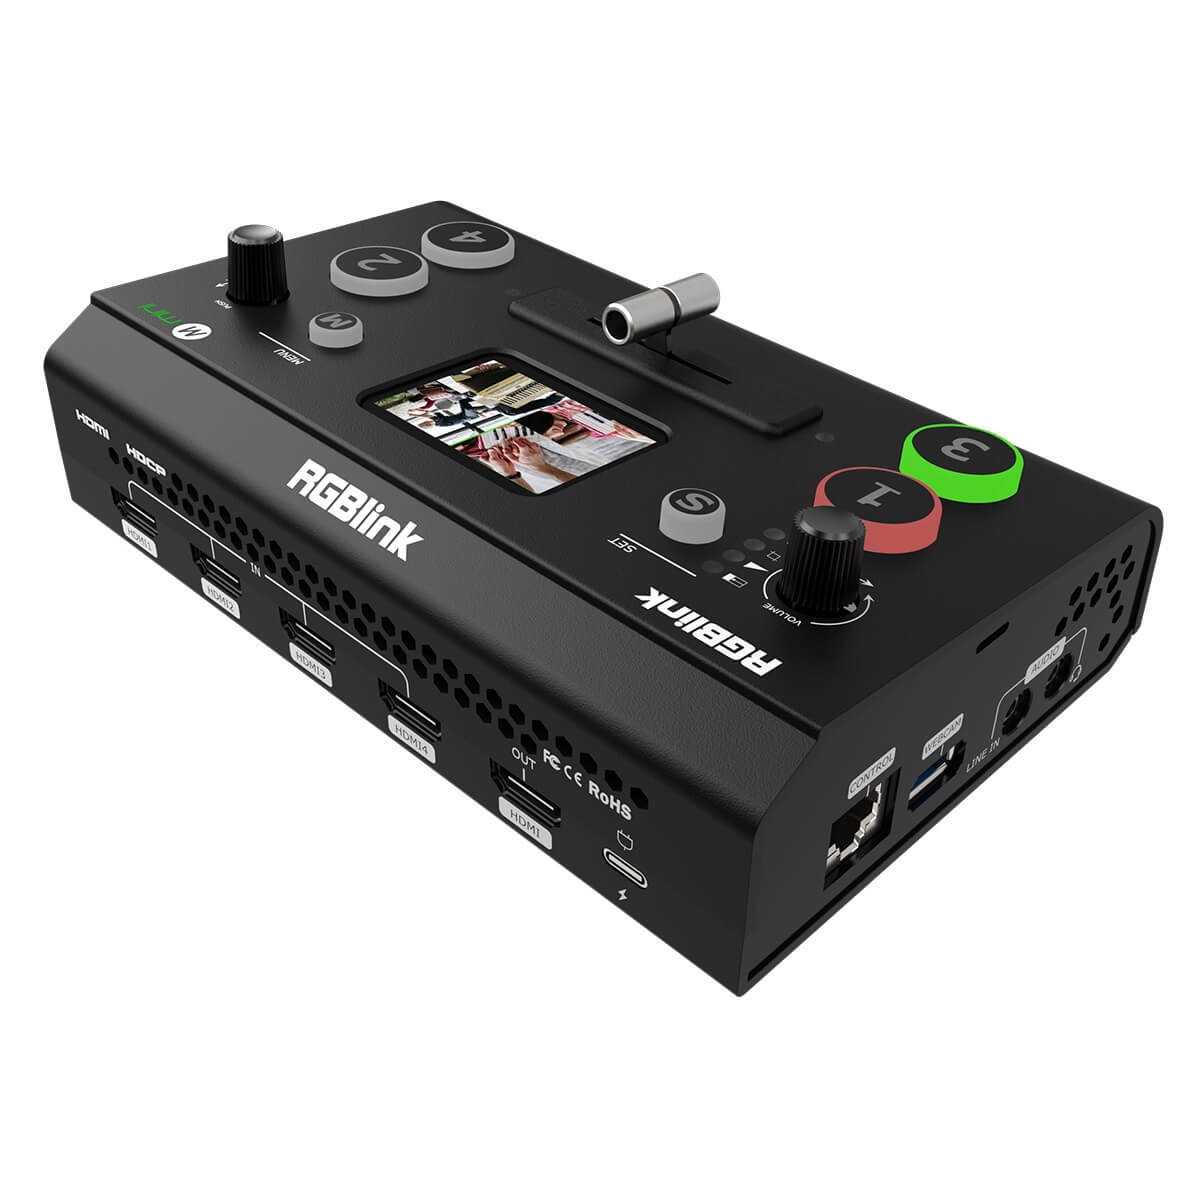 RGBlink mini (gen 2) - Compact Streaming Switcher with 4 HDMI inputs, angle